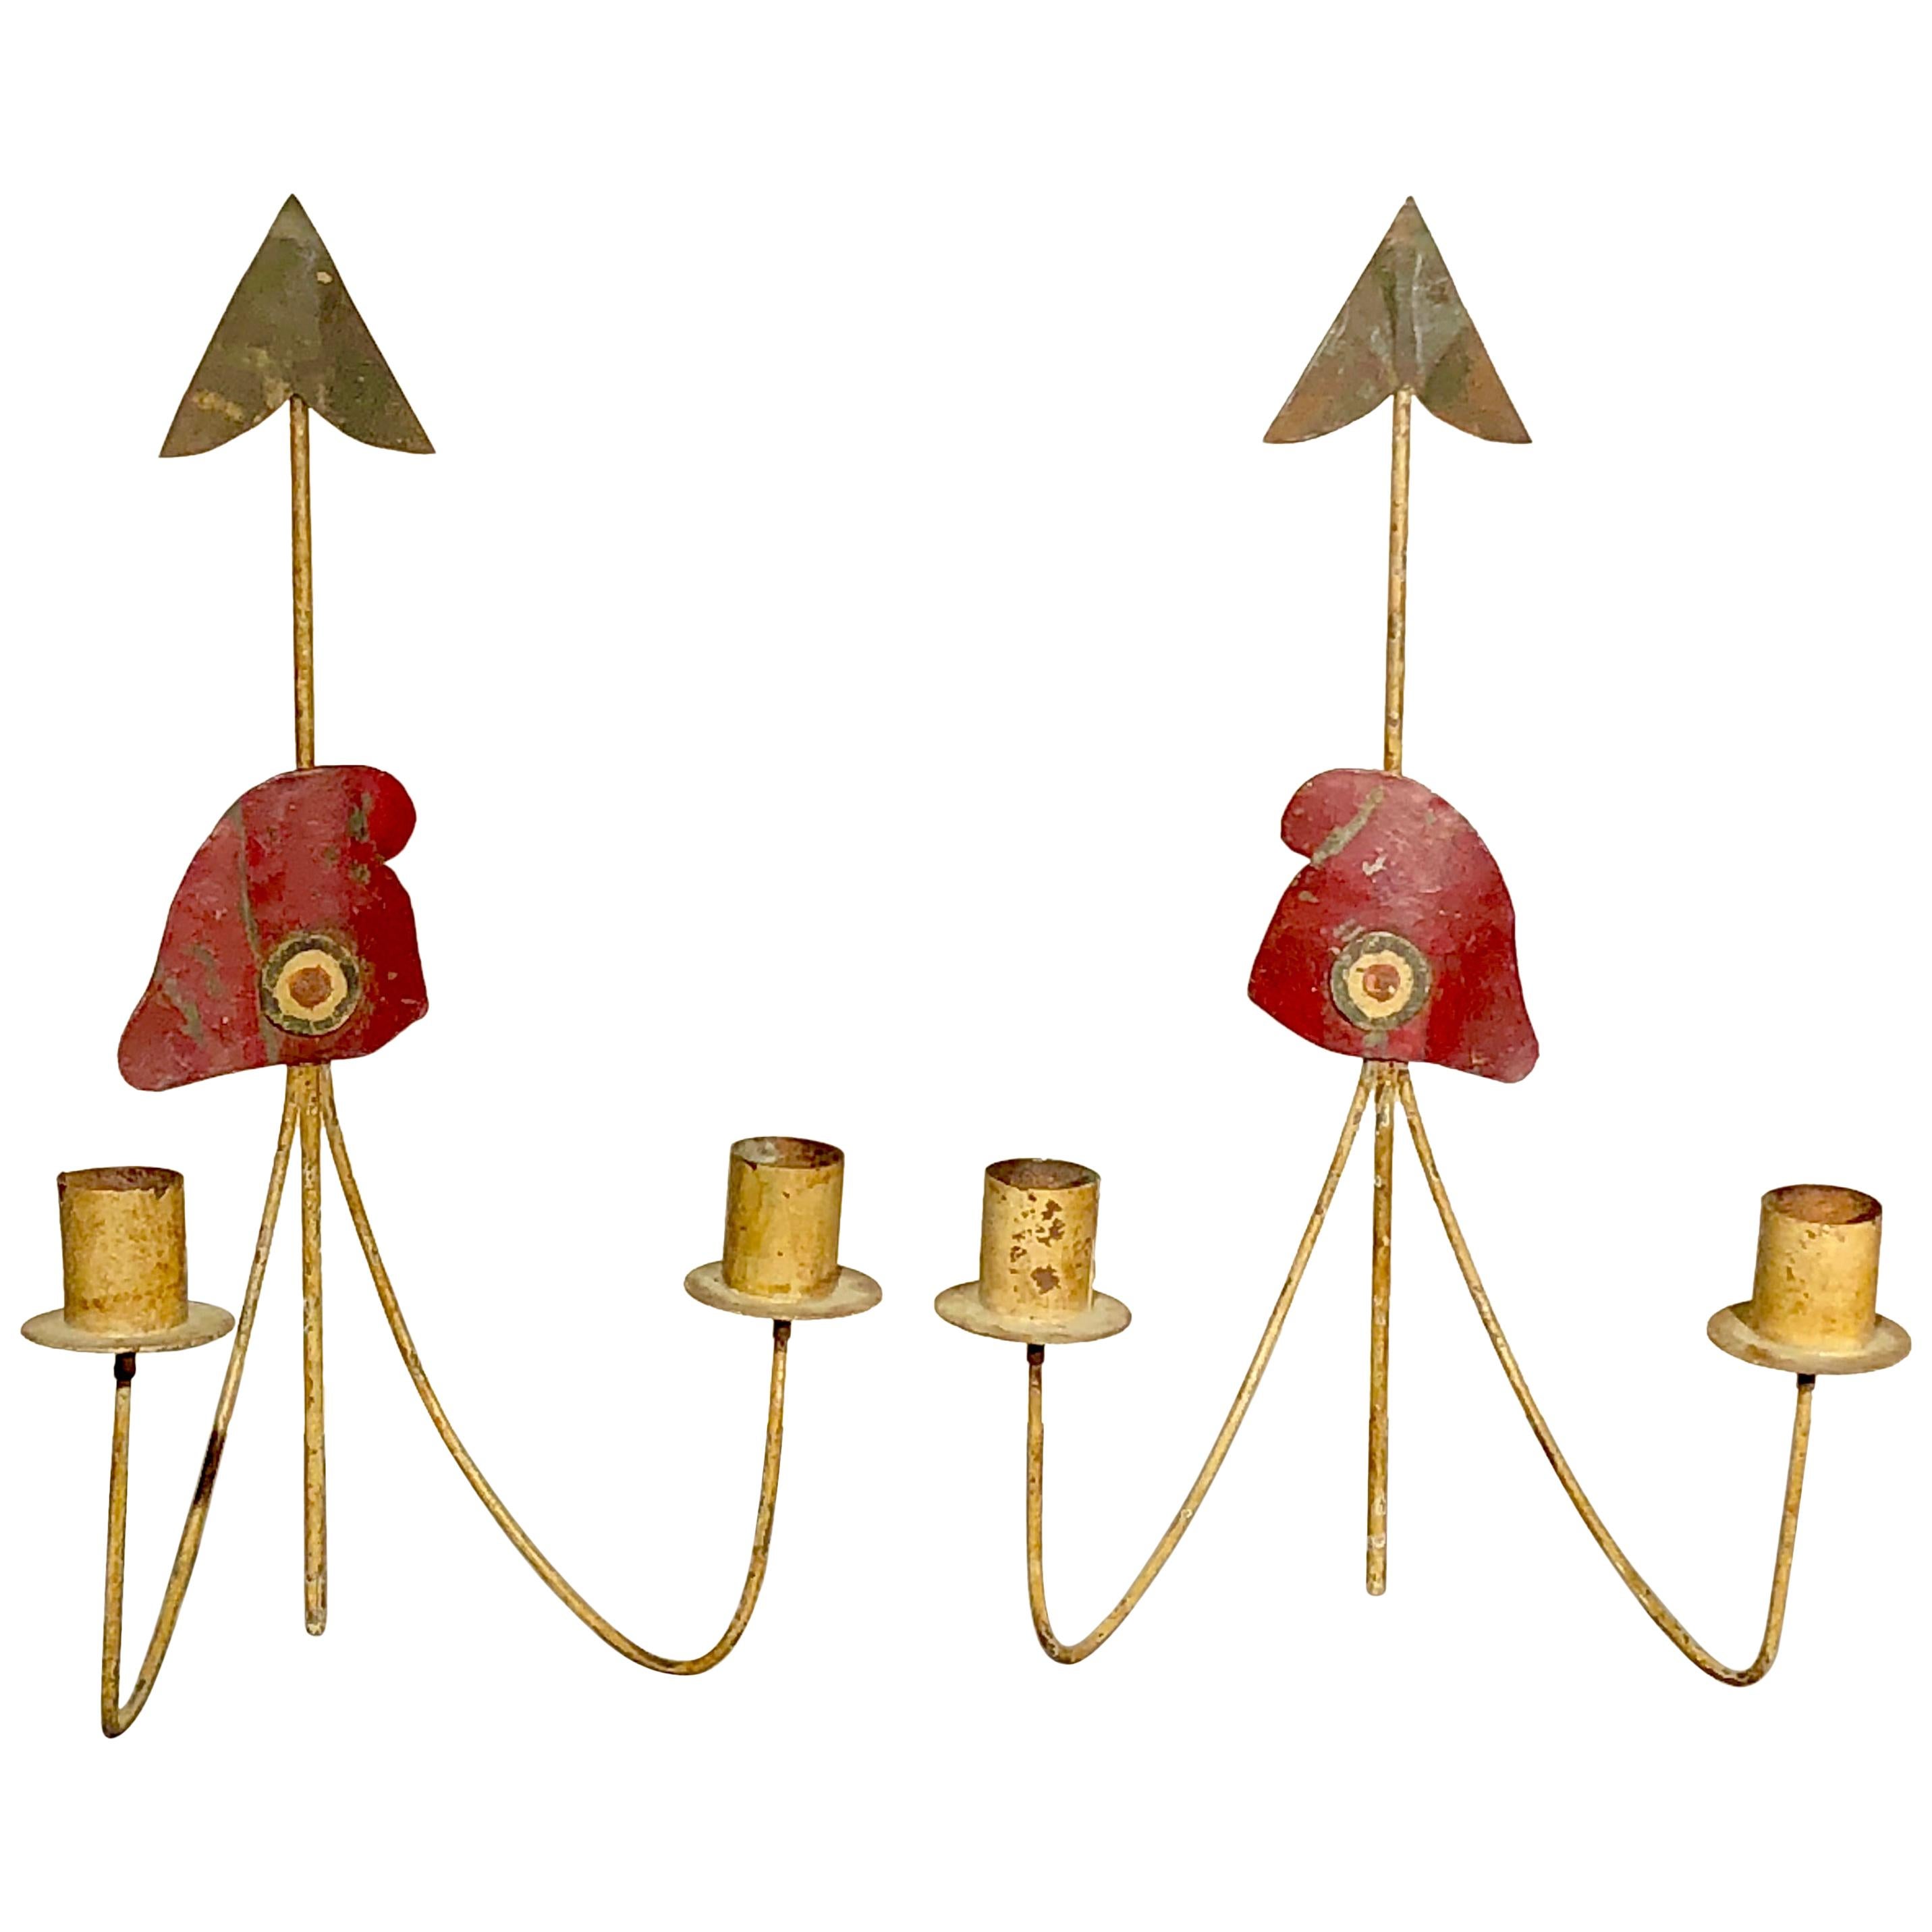 Pair of French Revolution Theme Sconces